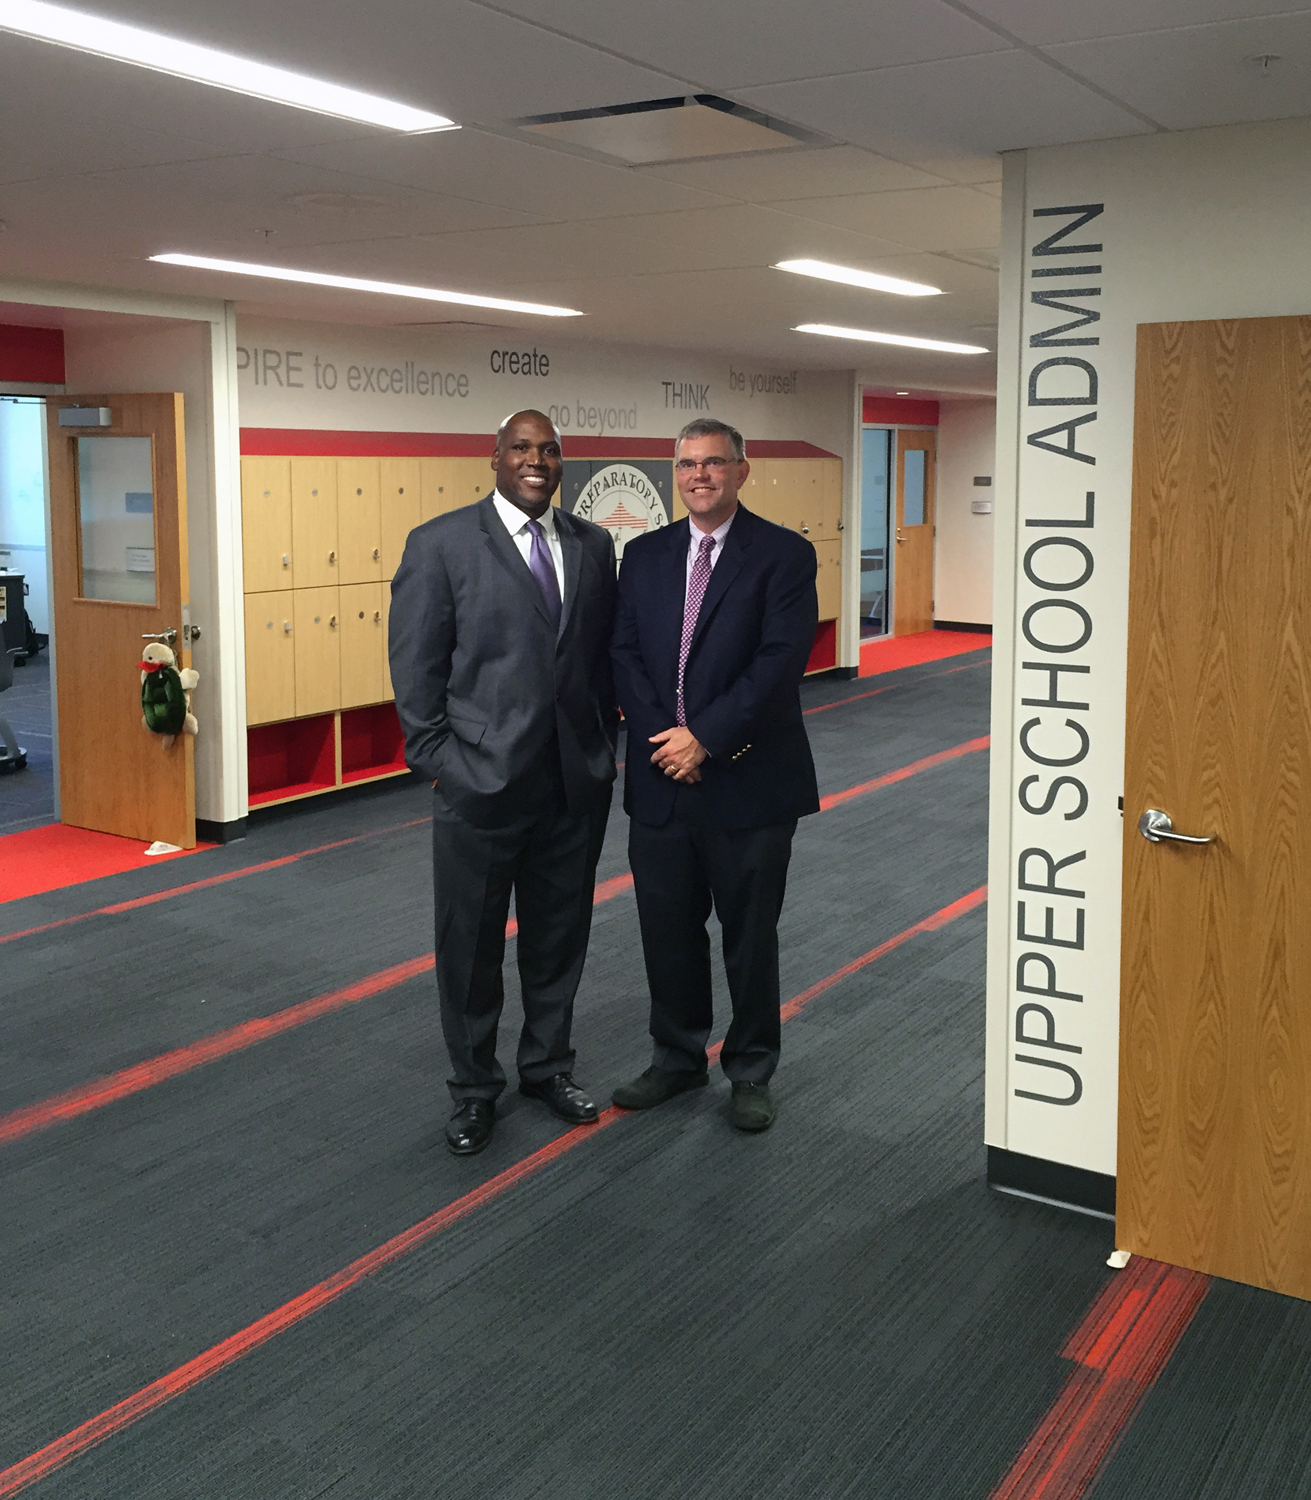 Head of School Kevin M. Plummer and Director of the Upper School Carl C. Carlson celebrate the opening of the renovated Upper School.